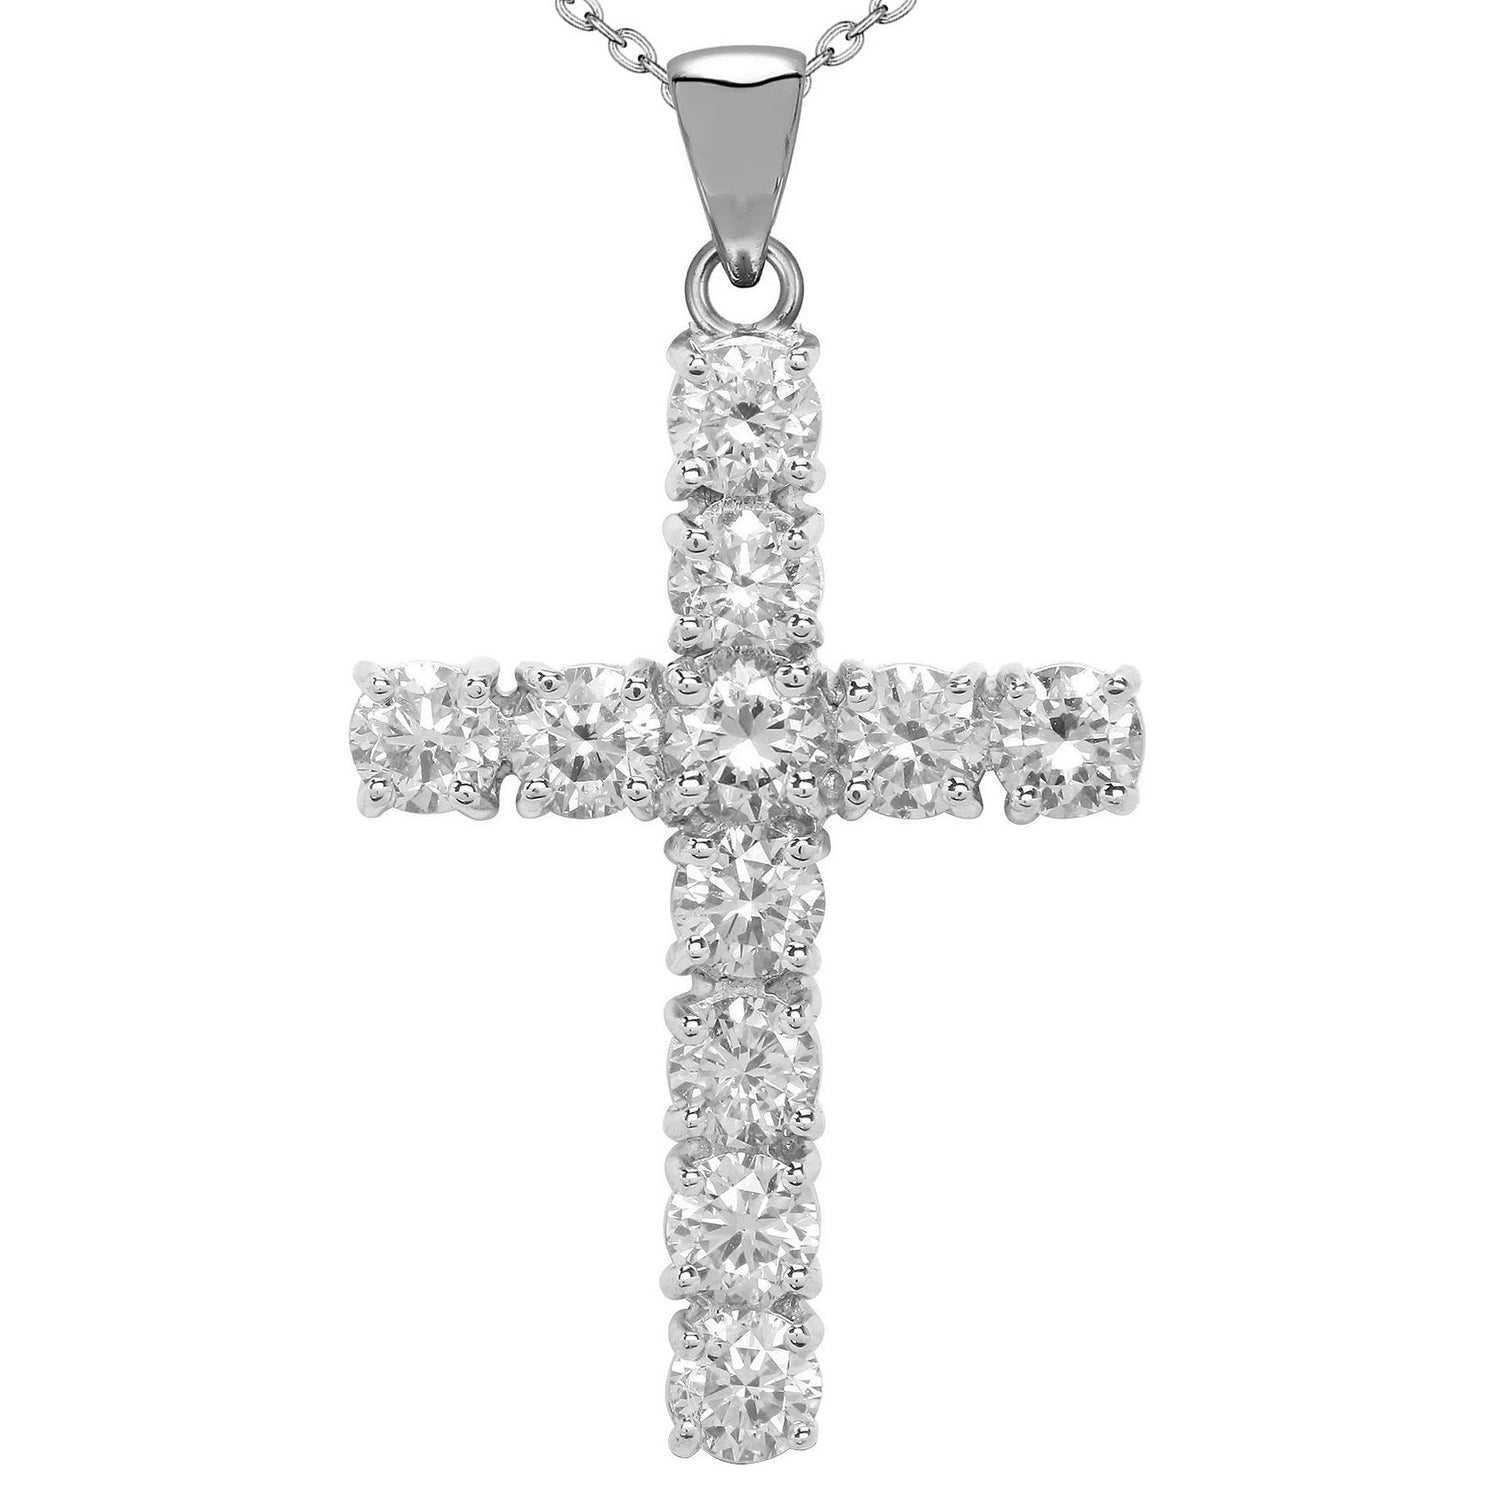 Gold Cross Round Real Diamond Pendant Necklace With Bail 5.75 Carats